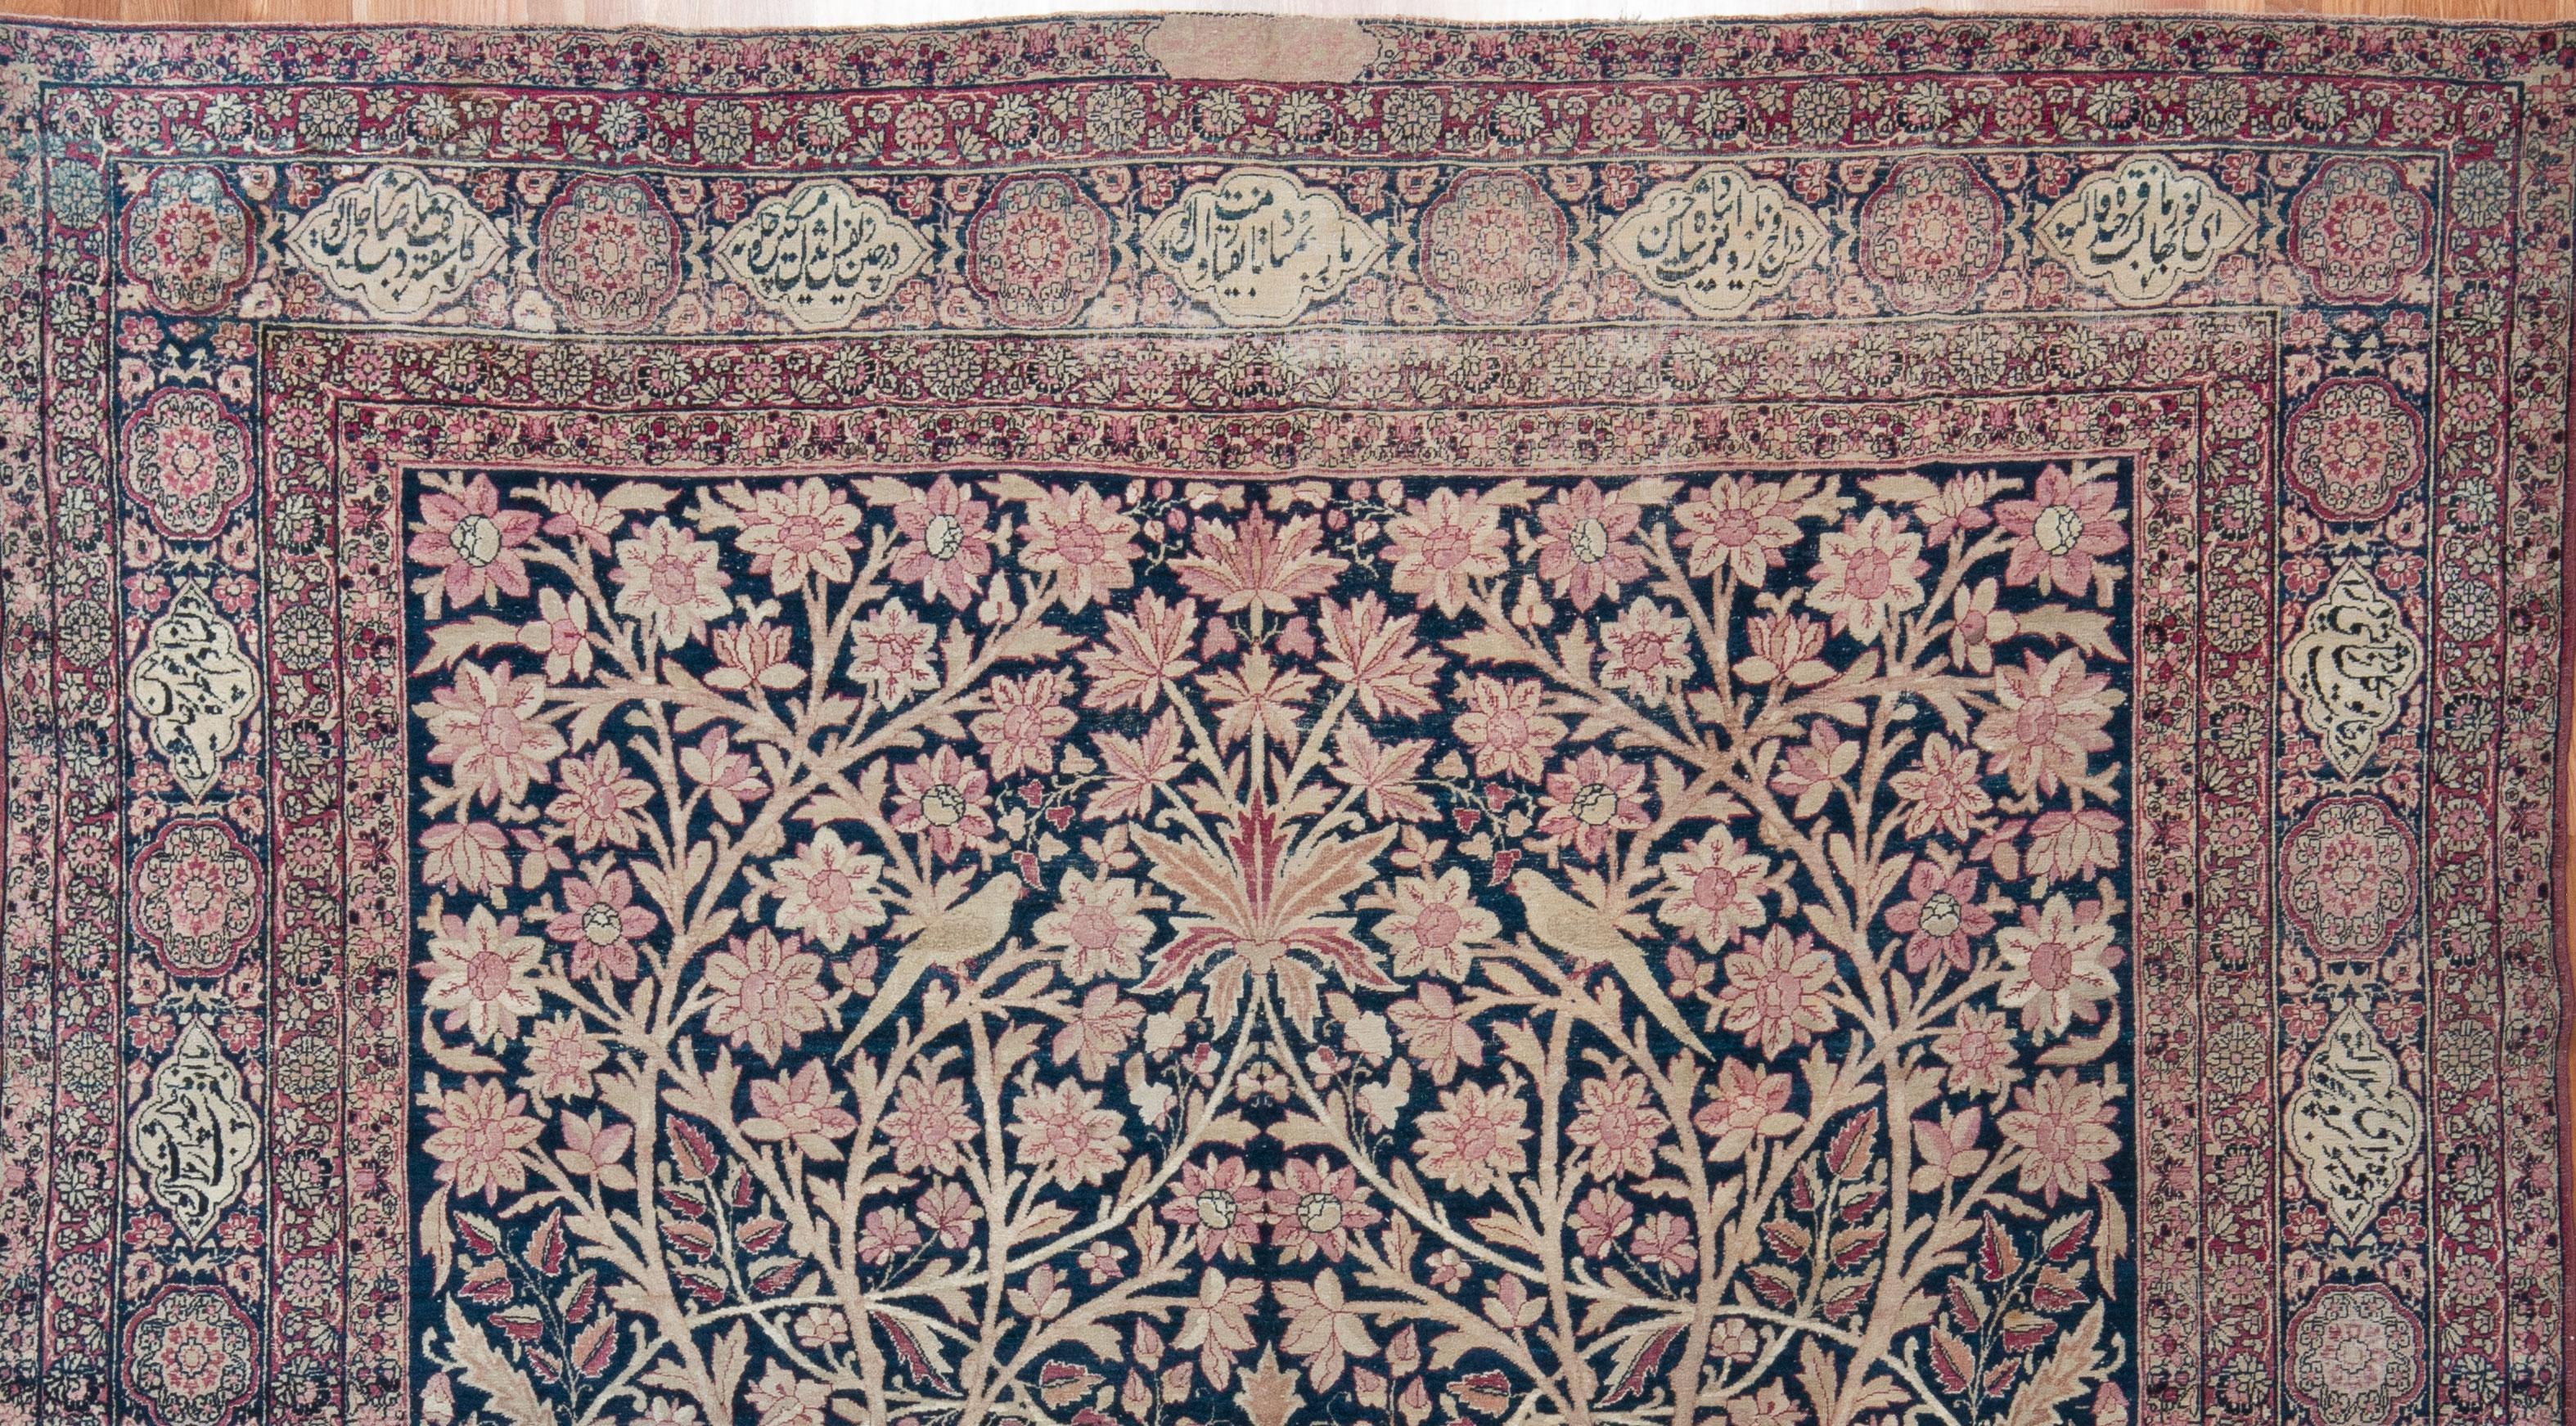 An intricately woven carpet from the late 19th Century, this Persian Lavar has a gorgeous botanical design of climbing vines, flowers and birds in mauve, soft pink and ivory set on a deep navy field. A very low wool pile. Naturally dyed. An heirloom